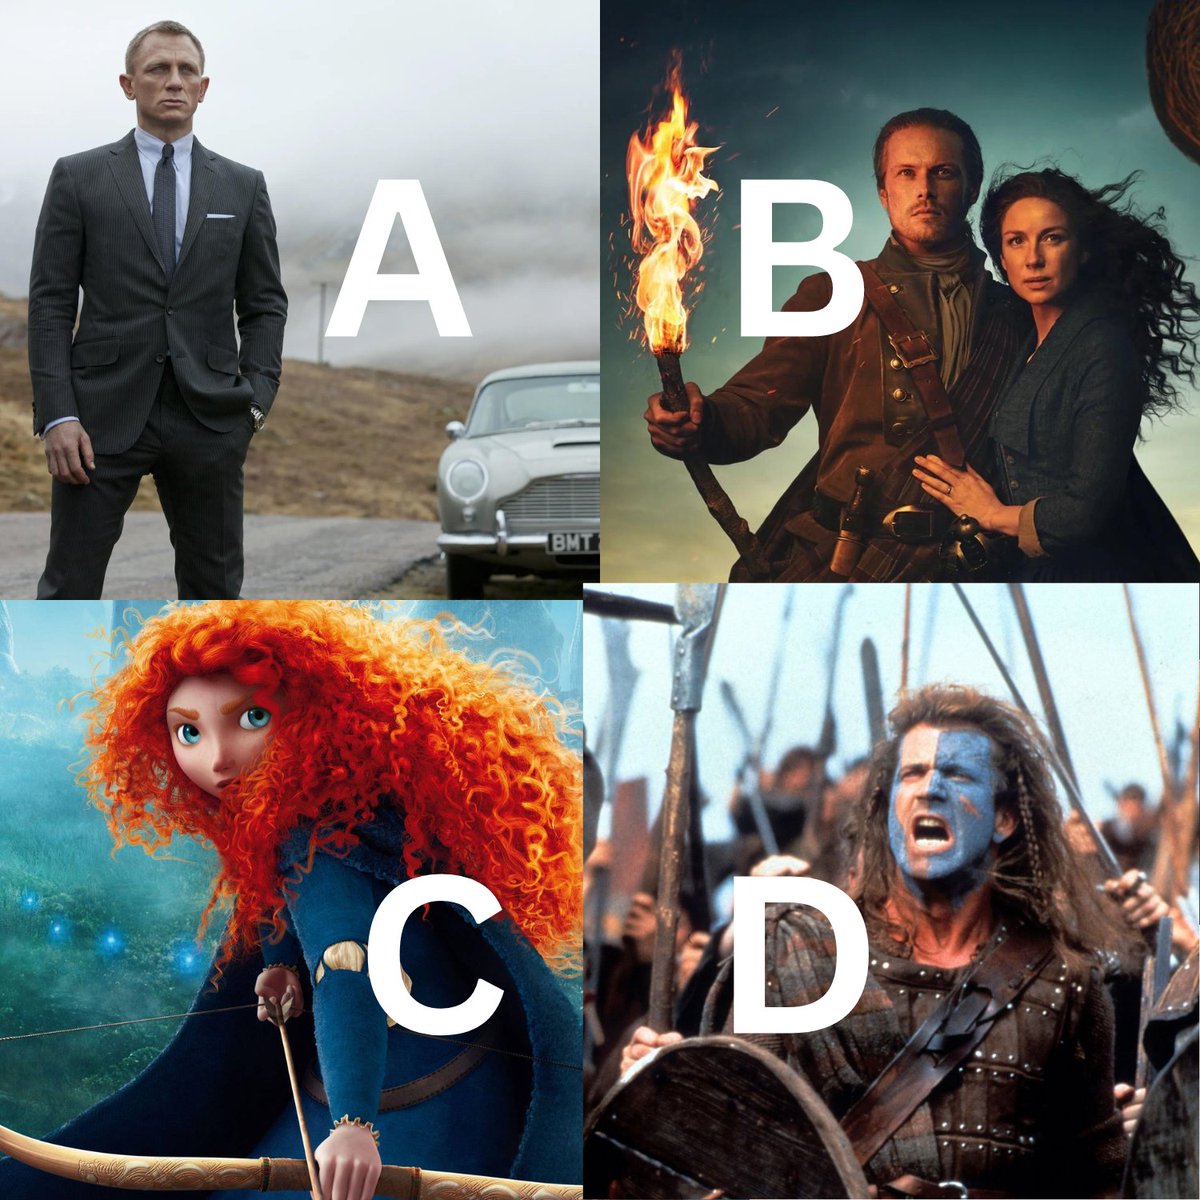 You get to spend 24 hours as a Scottish character, which one do you choose?